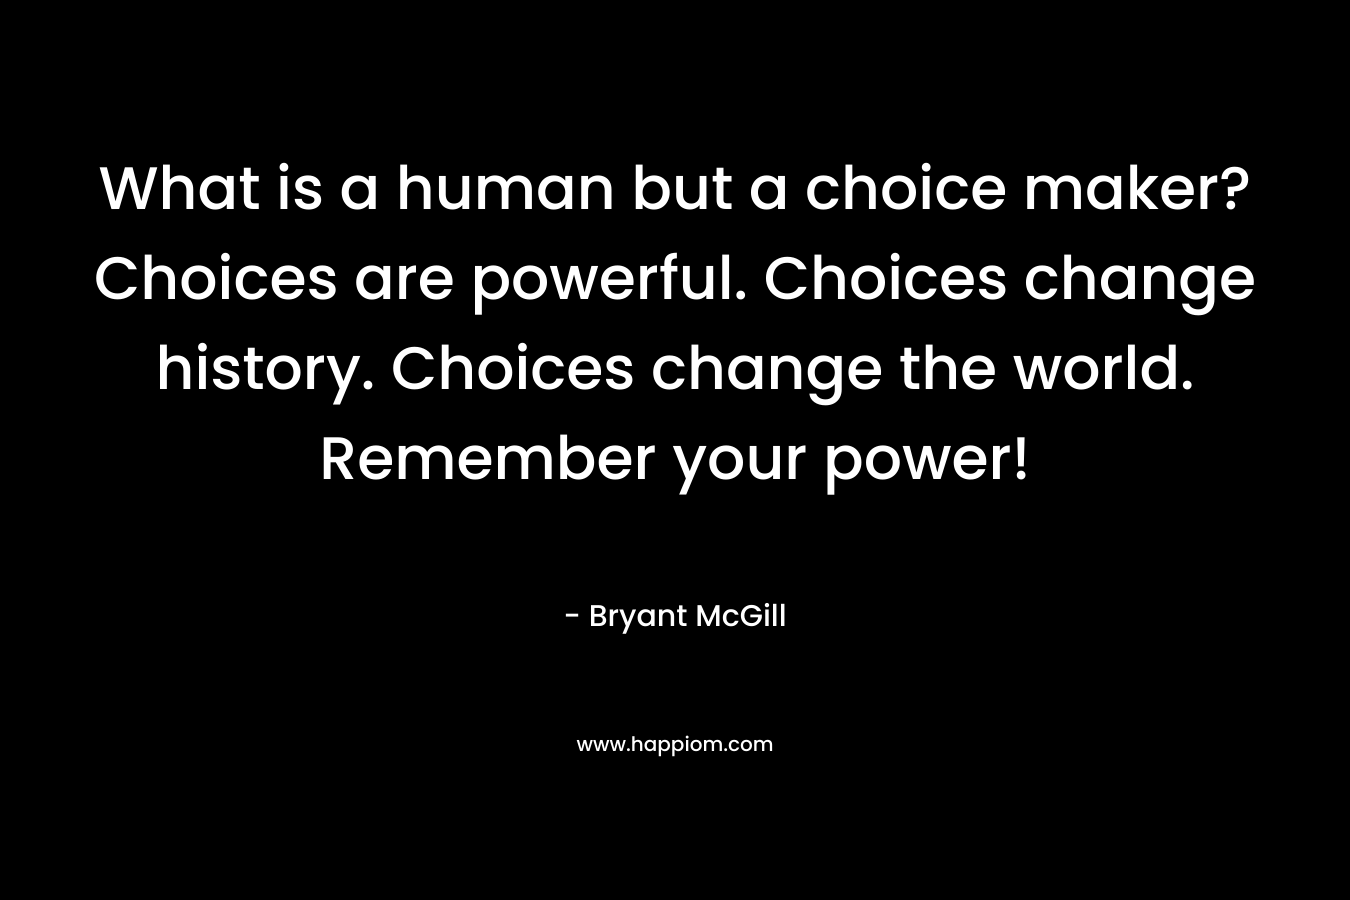 What is a human but a choice maker? Choices are powerful. Choices change history. Choices change the world. Remember your power!